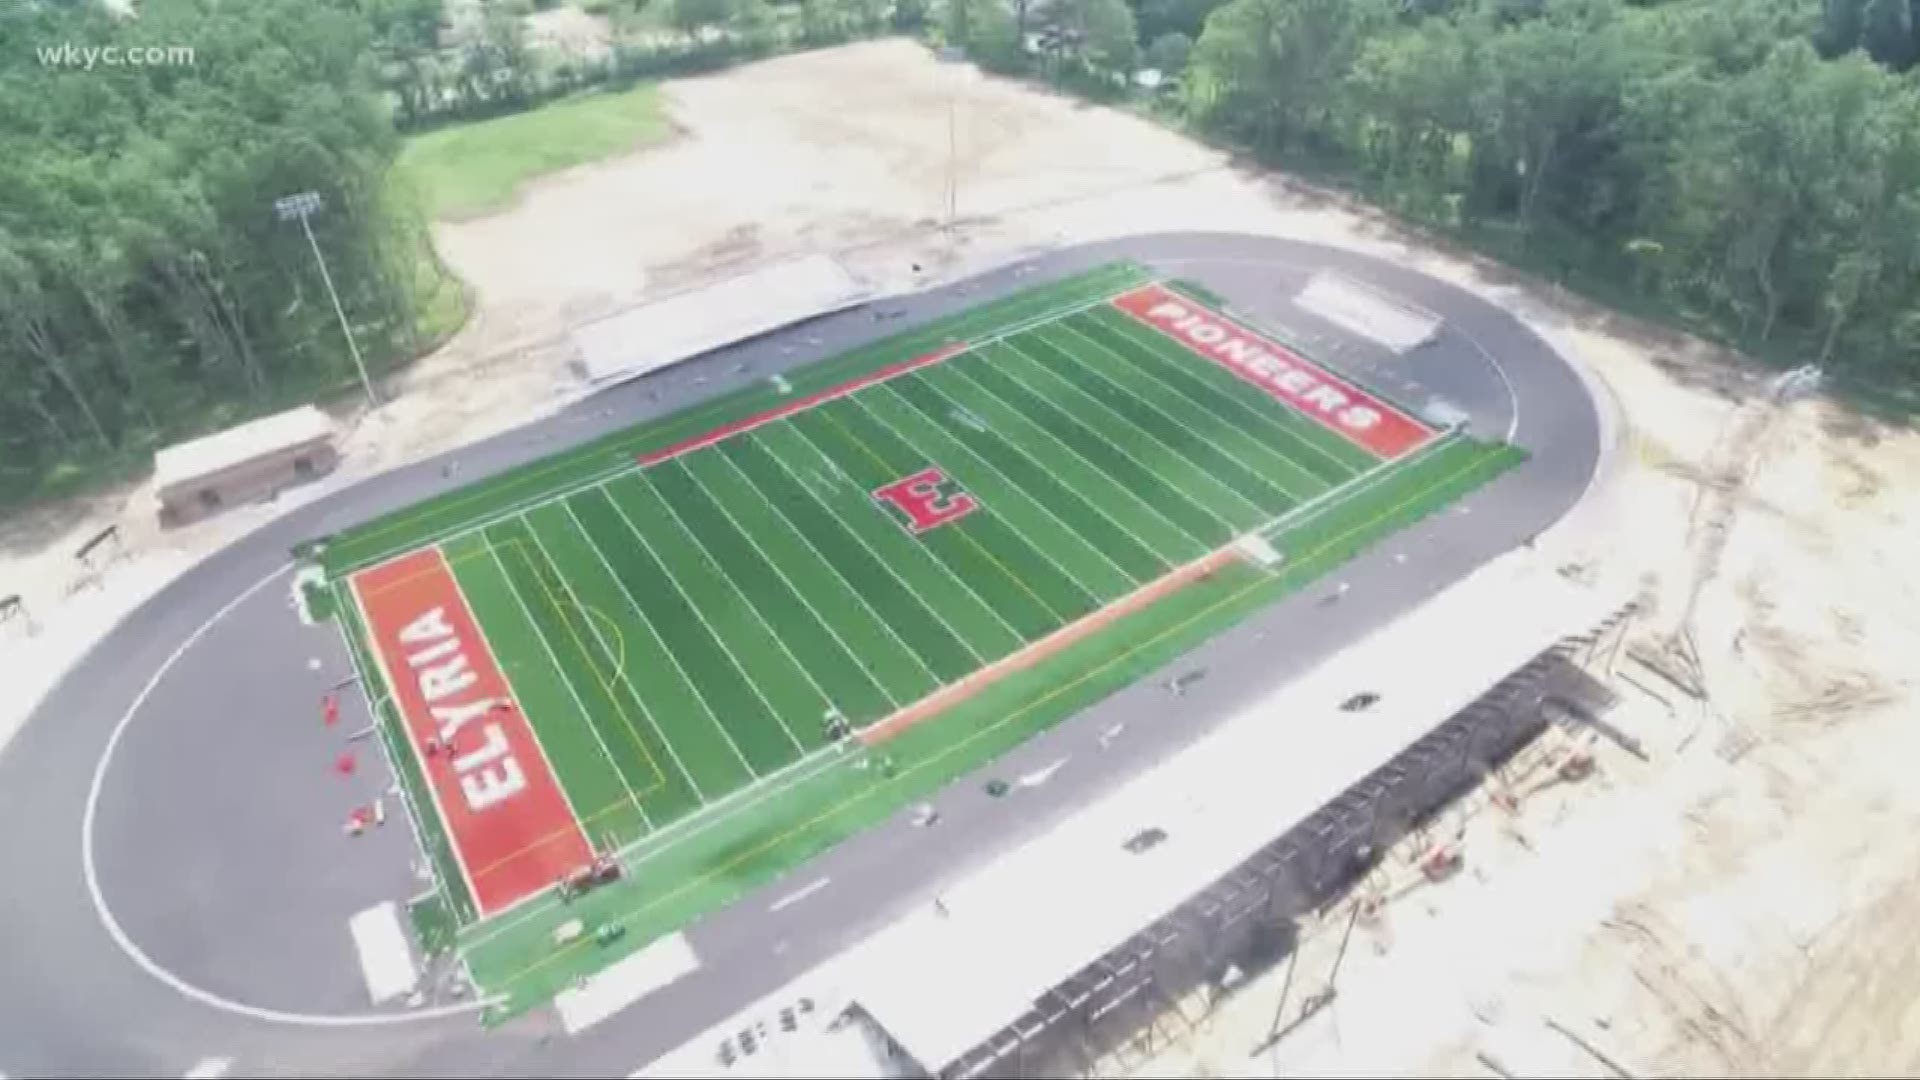 Aug. 24, 2018: It's a big night for Elyria City Schools as they debut their new Ely Stadium for high school football.